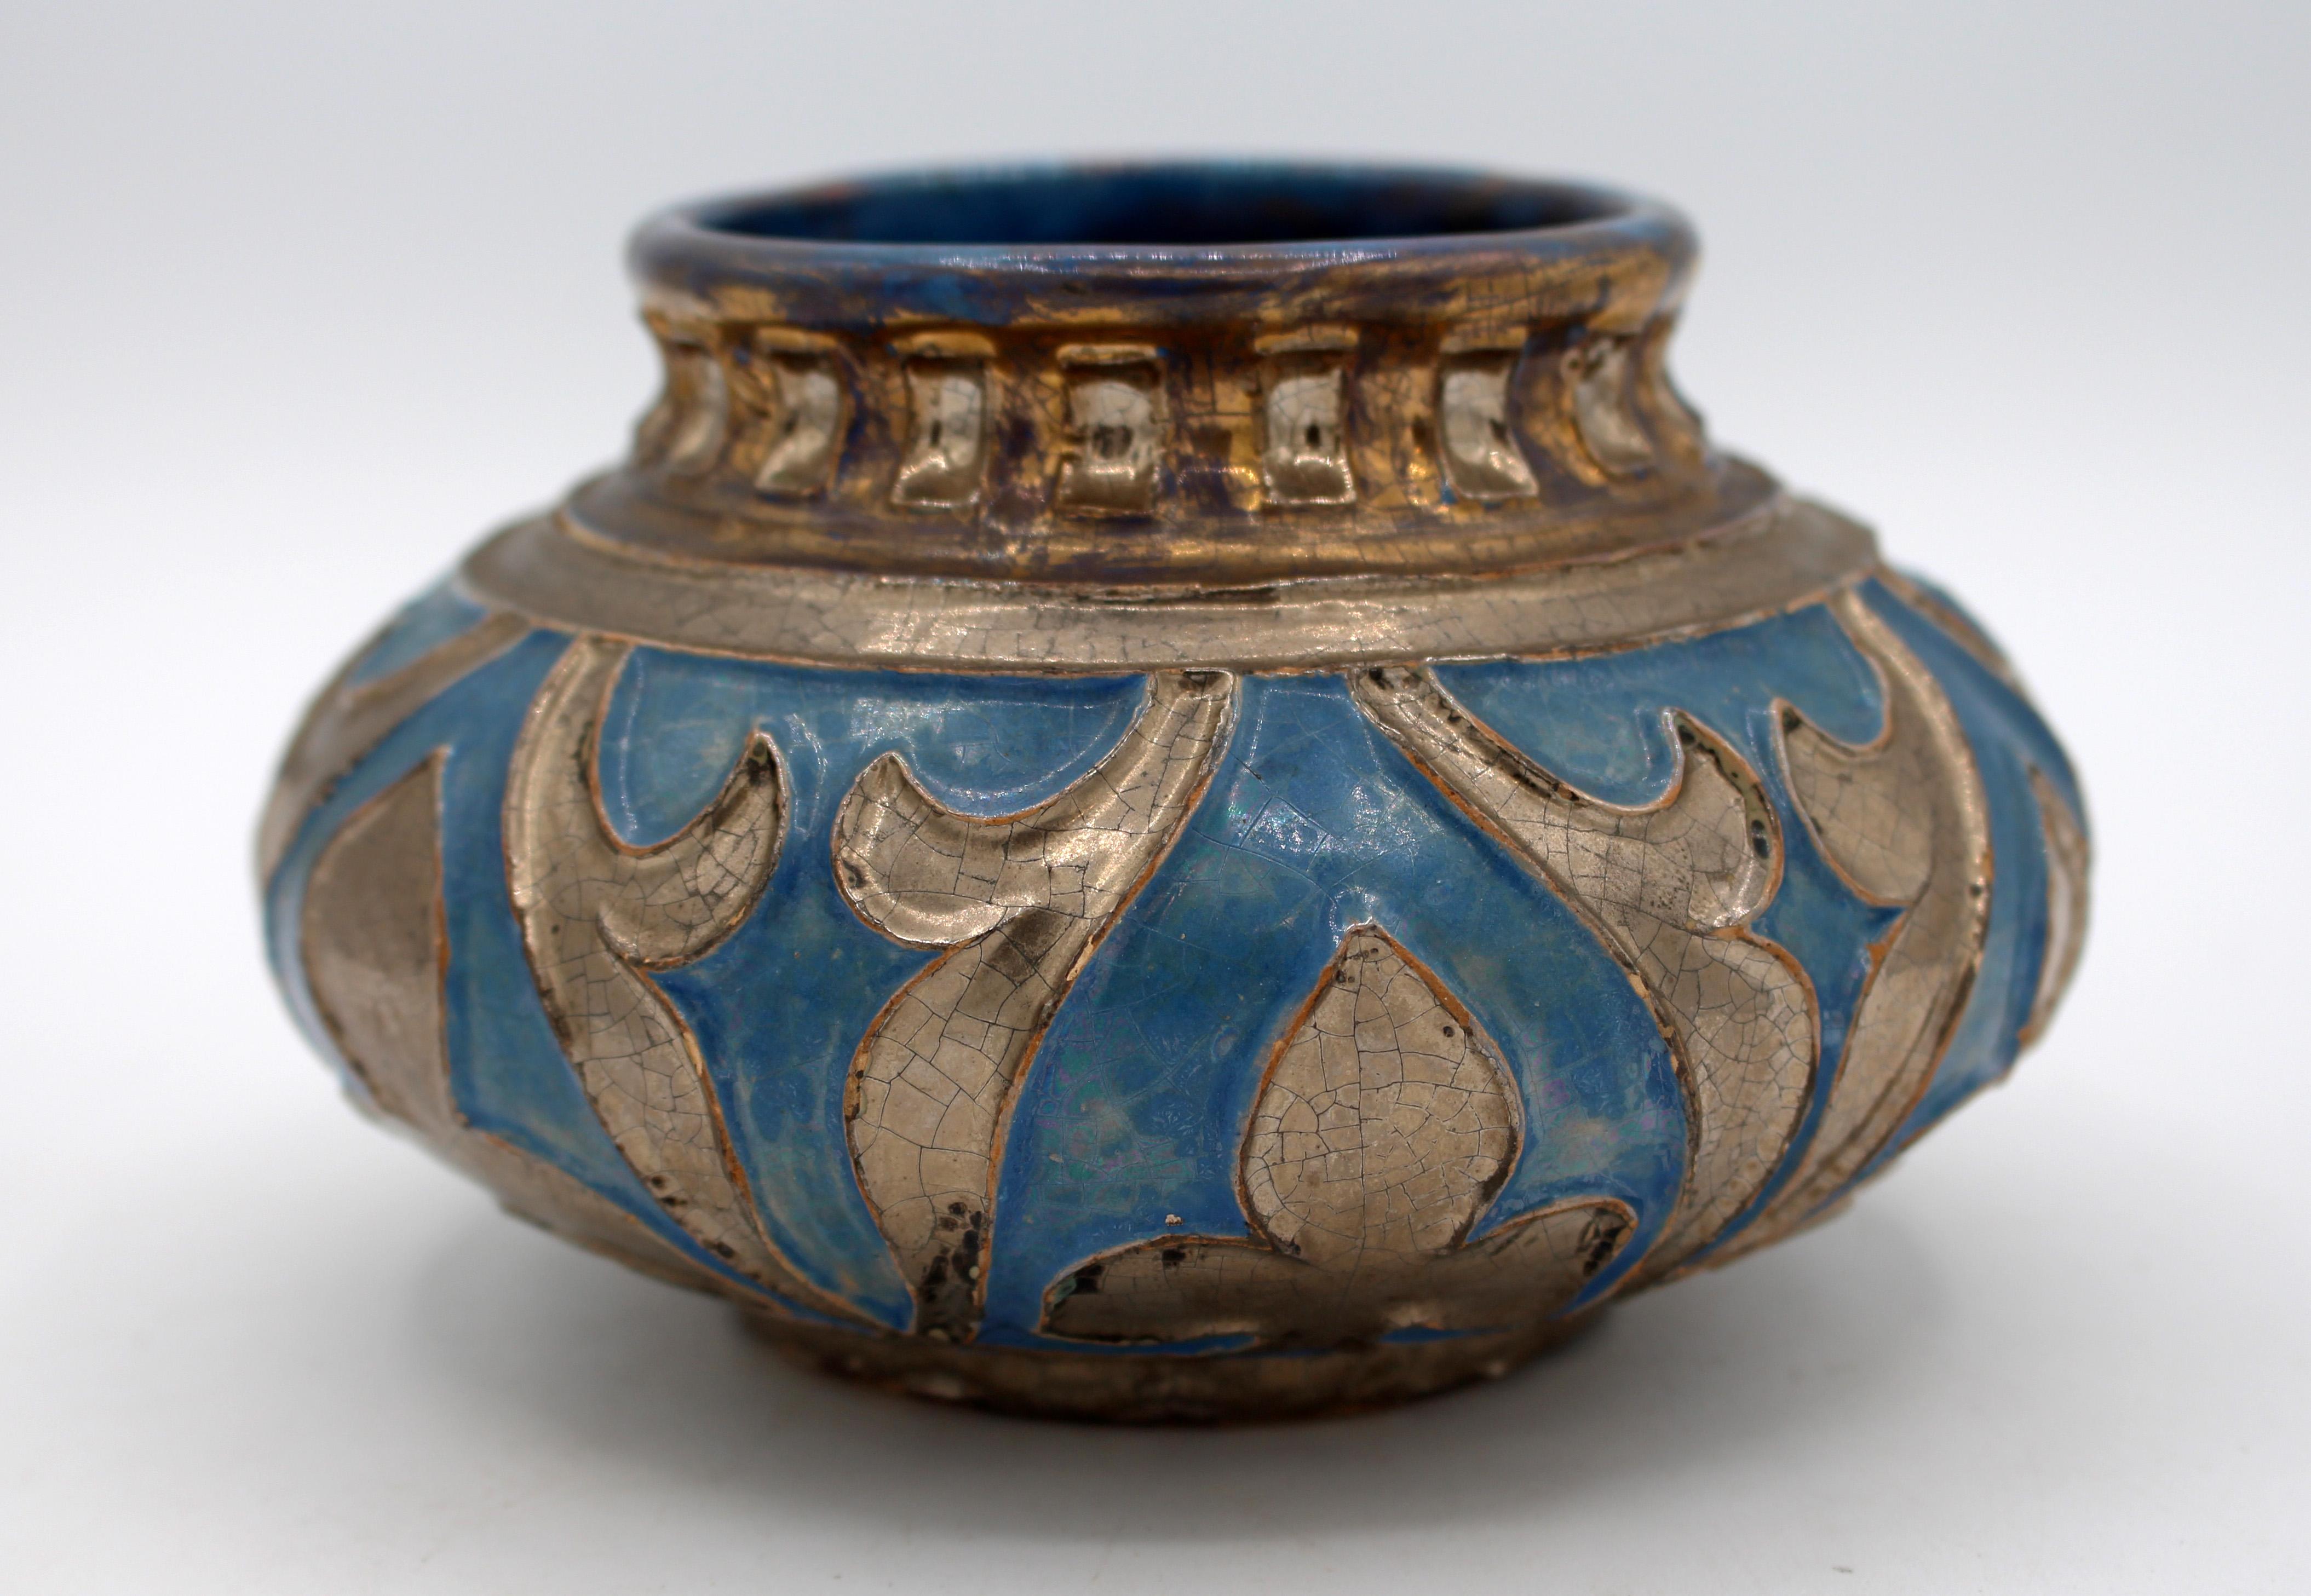 Circa 1920 pottery low vase or bowl by Daniel Zuloaga Boneta (Spain, 1852-1921). One of Spain's greatest ceramists & innovator in art pottery. He used traditional Renaissance & other motifs & techniques, as seen in this piece. Signed. Provenance: